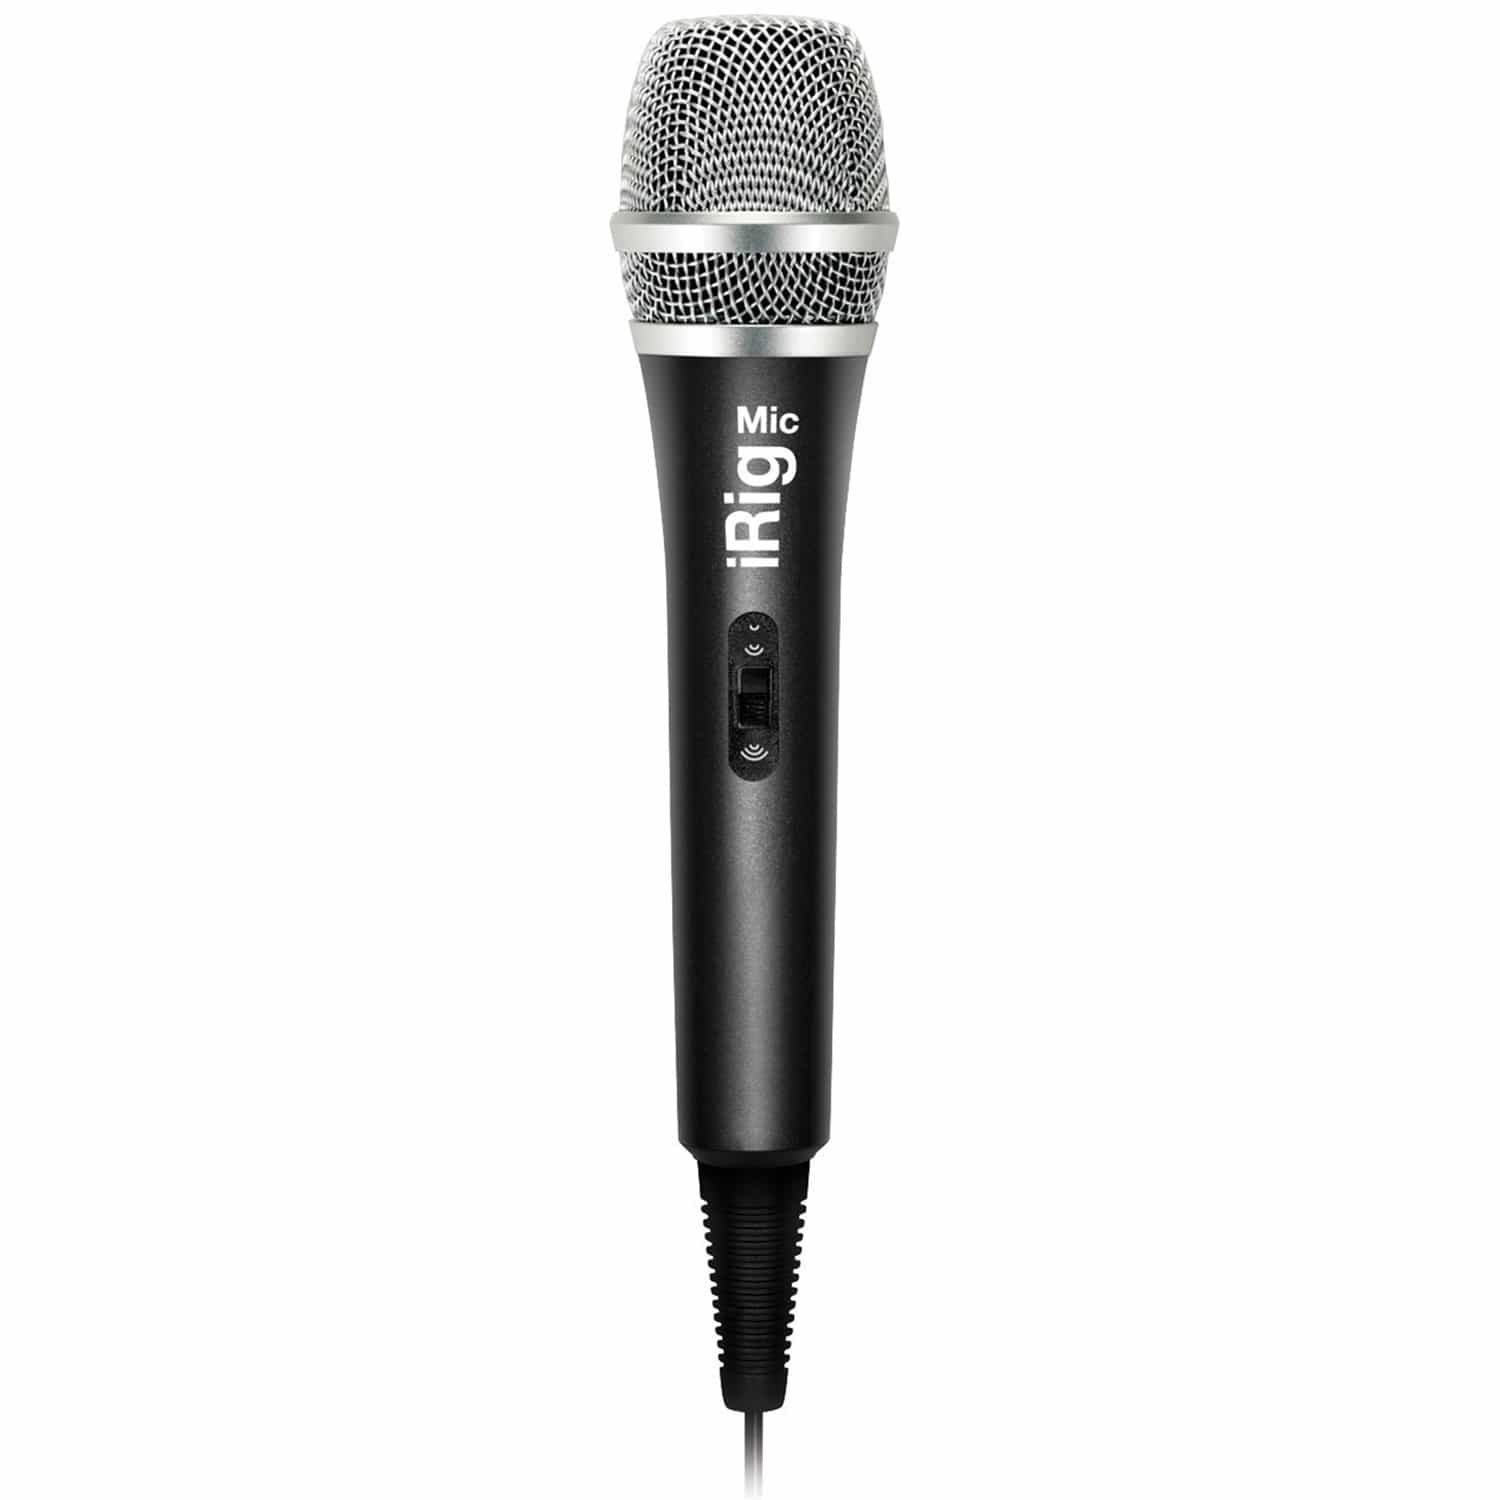 Ik Multimedia Irig Mic Handheld Condenser Microphone for iPhone, iPod  touch, iPad, and Android Devices